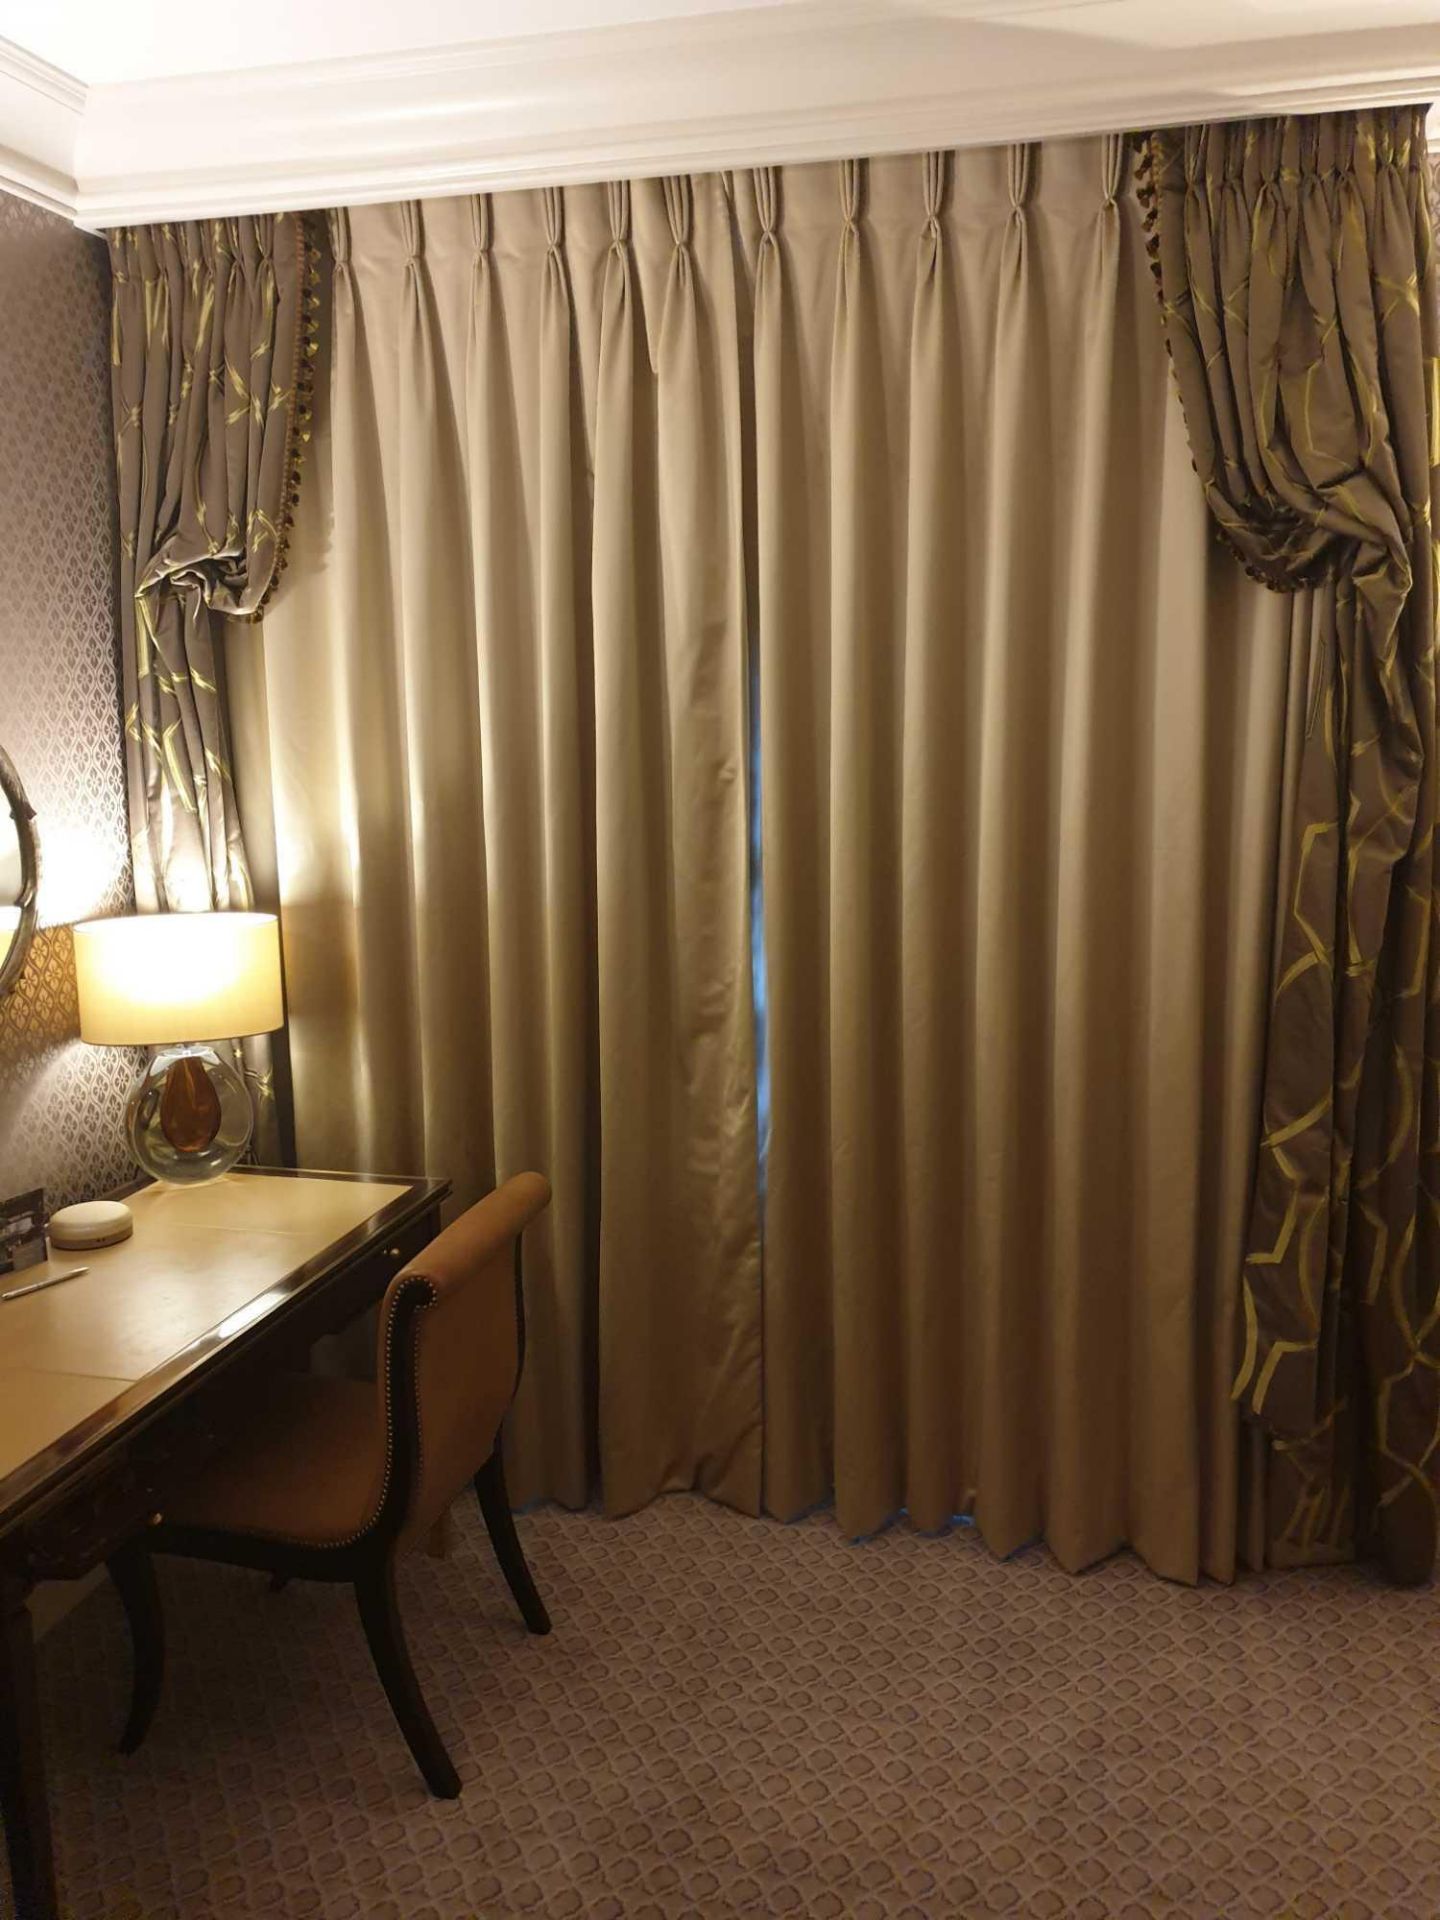 A Pair Of Silver Silk Drapes And Jabots With Tie Backs Span 230 x 260cm (Room 341)